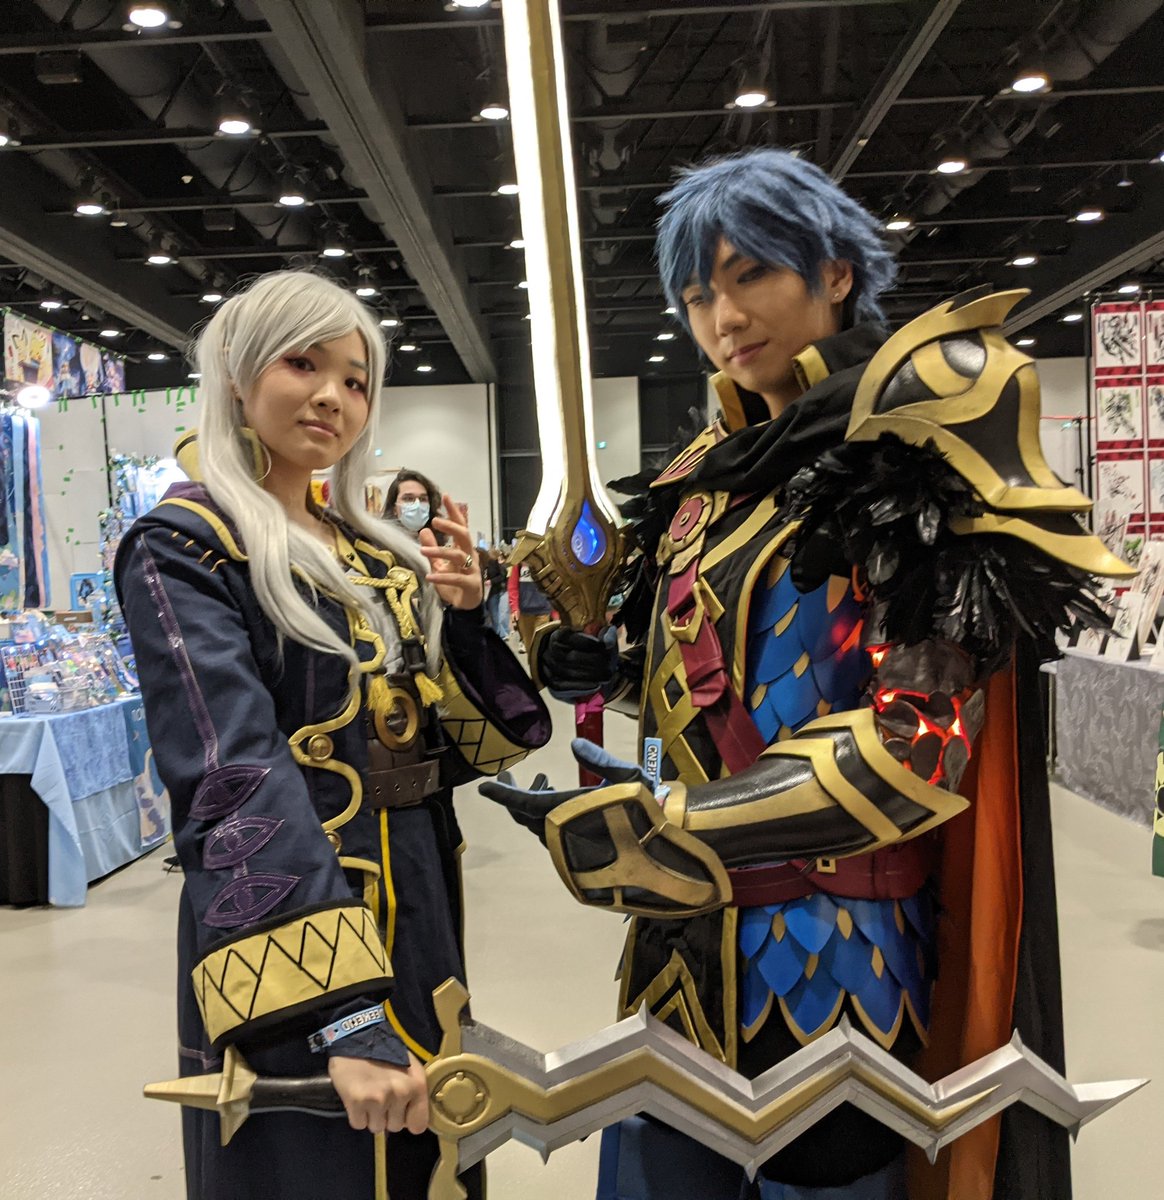 Incredible Fire Emblem Cosplay from @RaisorCosplay and @AtelierRadius 🤩🤩